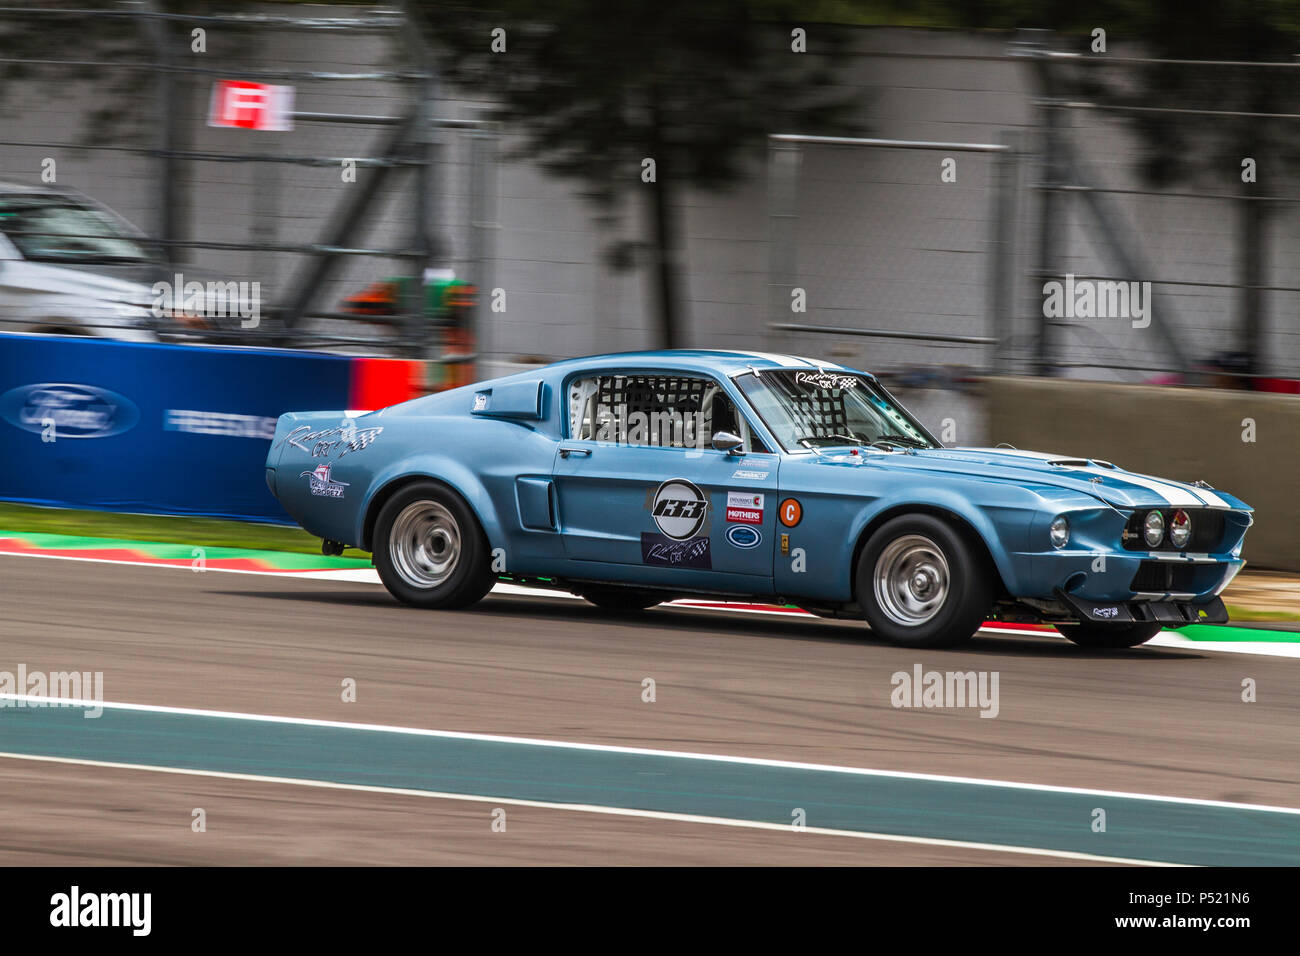 Mexico City, Mexico – September 01, 2017: Autodromo Hermanos Rodriguez. FIA World Endurance Championship WEC. 1967 Mustang Shelby GT500 No.133 running at the free practice for the Mexico Vintage Series. Stock Photo